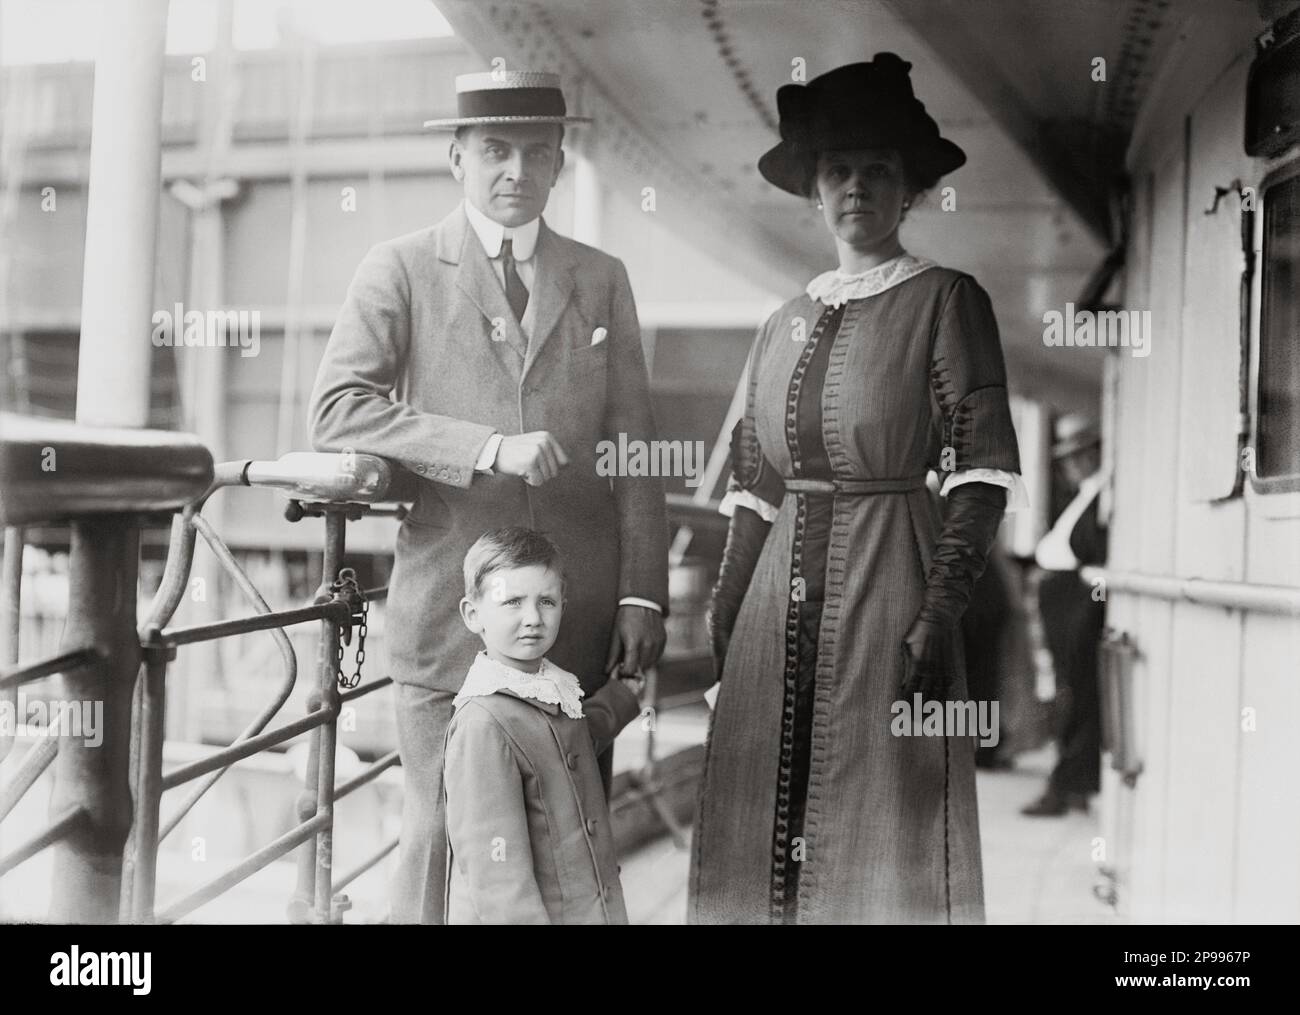 1912 ca , New York , USA :  The count CARL Poul Oskar von MOLTKE (  von Moltke-Huitfeldt - af Moltke Hvtfeld  , 1869 - 1935 )  with american wife Cornelia Van Rensselaer Thayer Robb ( 1881- 1960 ) and son Count Carl Adam Moltke ( 1908 -1989 ) . Carl Poul was the Danish minister to the United States in 1908 and the Foreign Minister of Denmark 1924 - 1926. His son Carl Adam became a member of the Danish underground in World War II . - NOBILITY - NOBILI - Nobiltà  - REALI  - ROYALTY -  BELLE EPOQUE - tie - cravatta - hat - paglietta - cappello - gloves - guanti  - transatlantico - nave - ocean cr Stock Photo